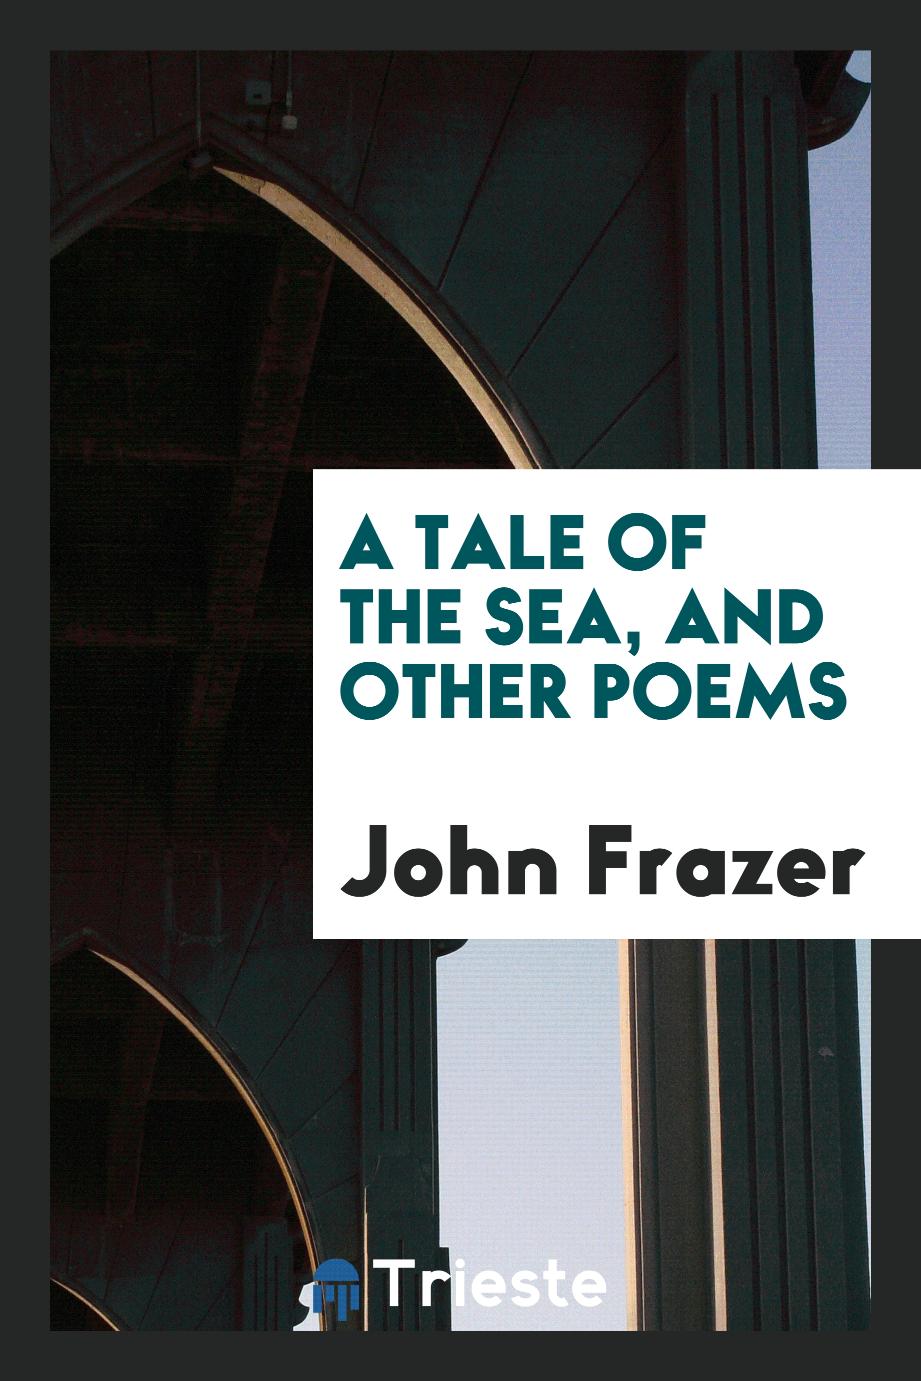 A Tale of the Sea, and Other Poems